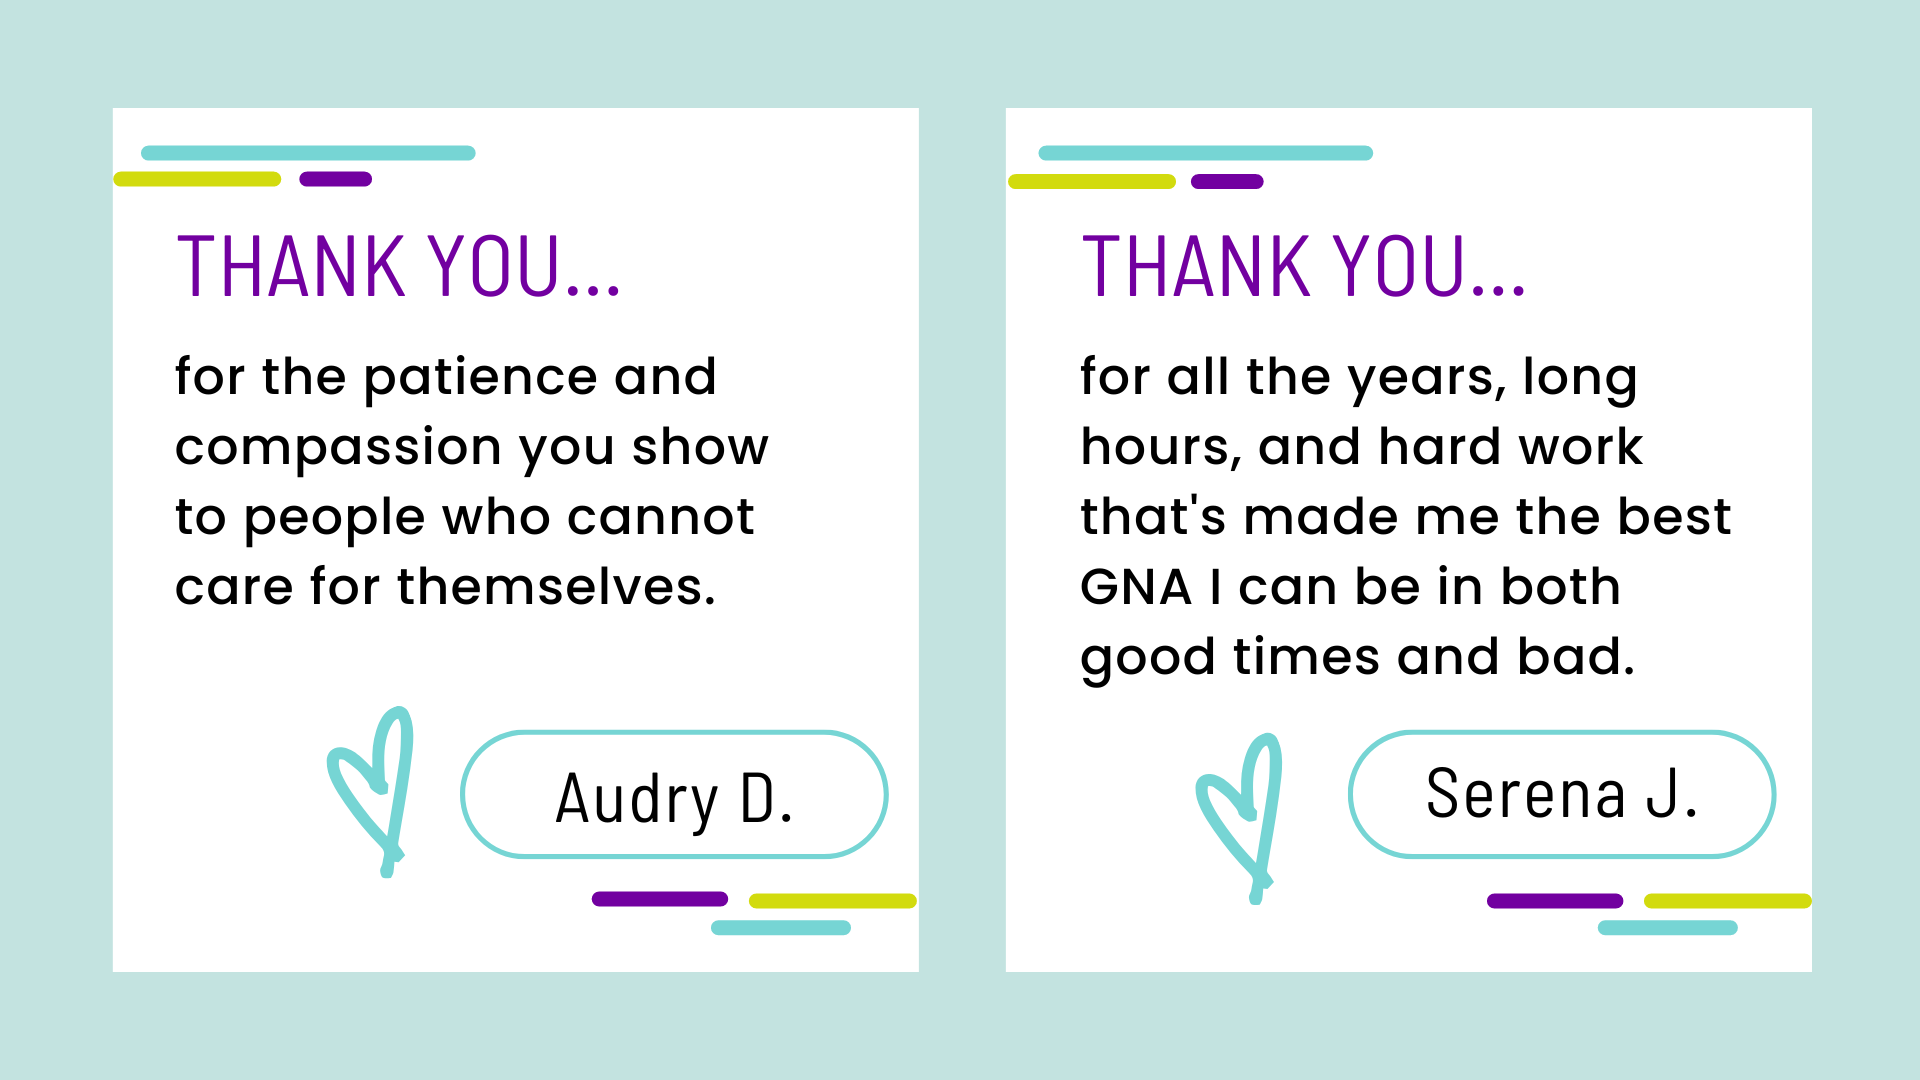 Two thank-you notes that CNAs Audry and Serena wrote to themselves to celebrate CNA Week.